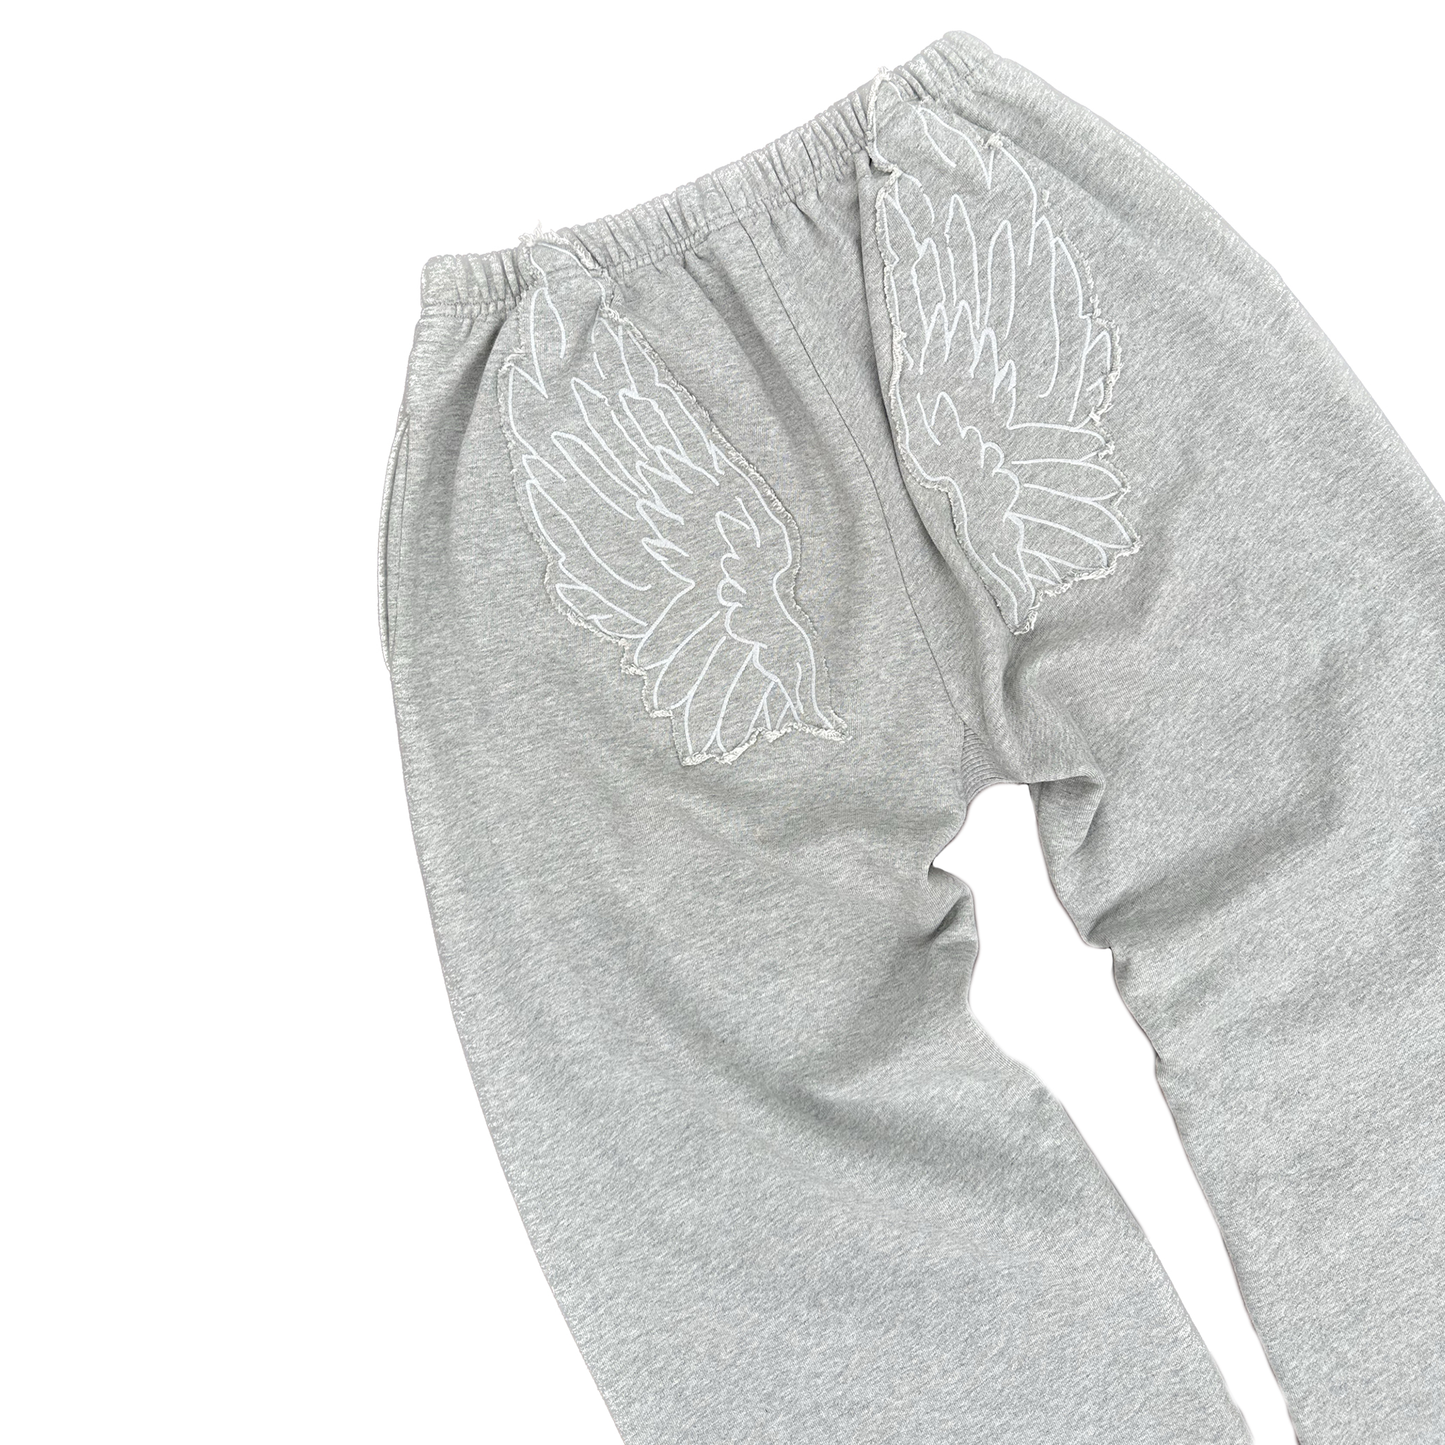 Fly track pant - Grey